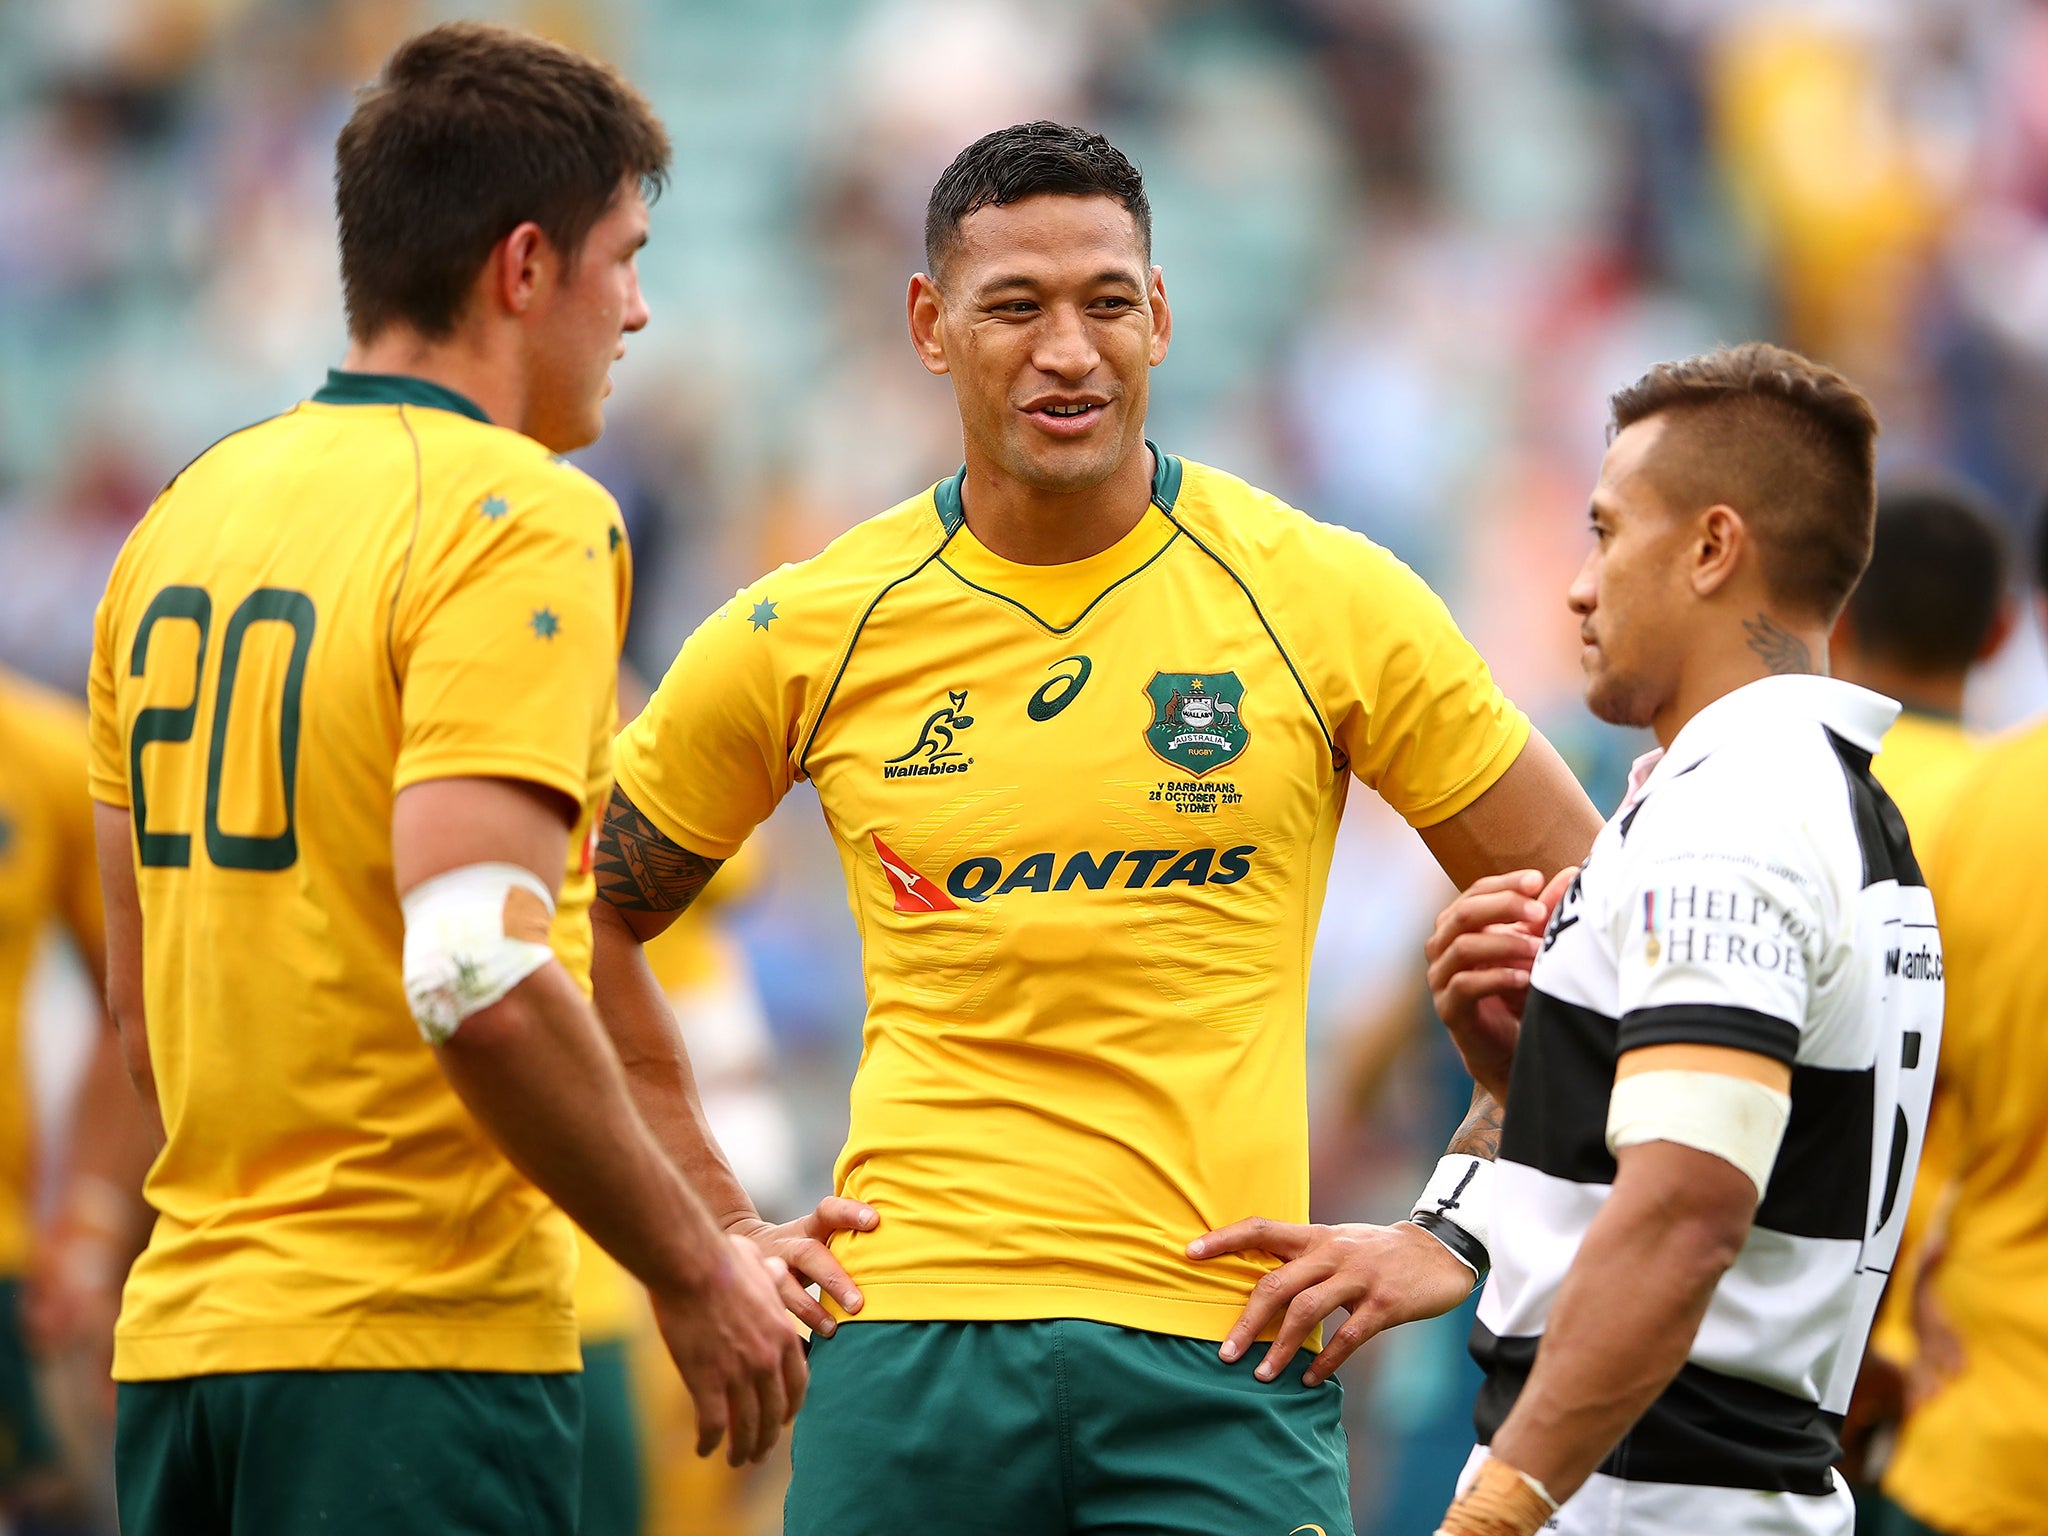 Folau's Australia contract is set to expire at the end of the season